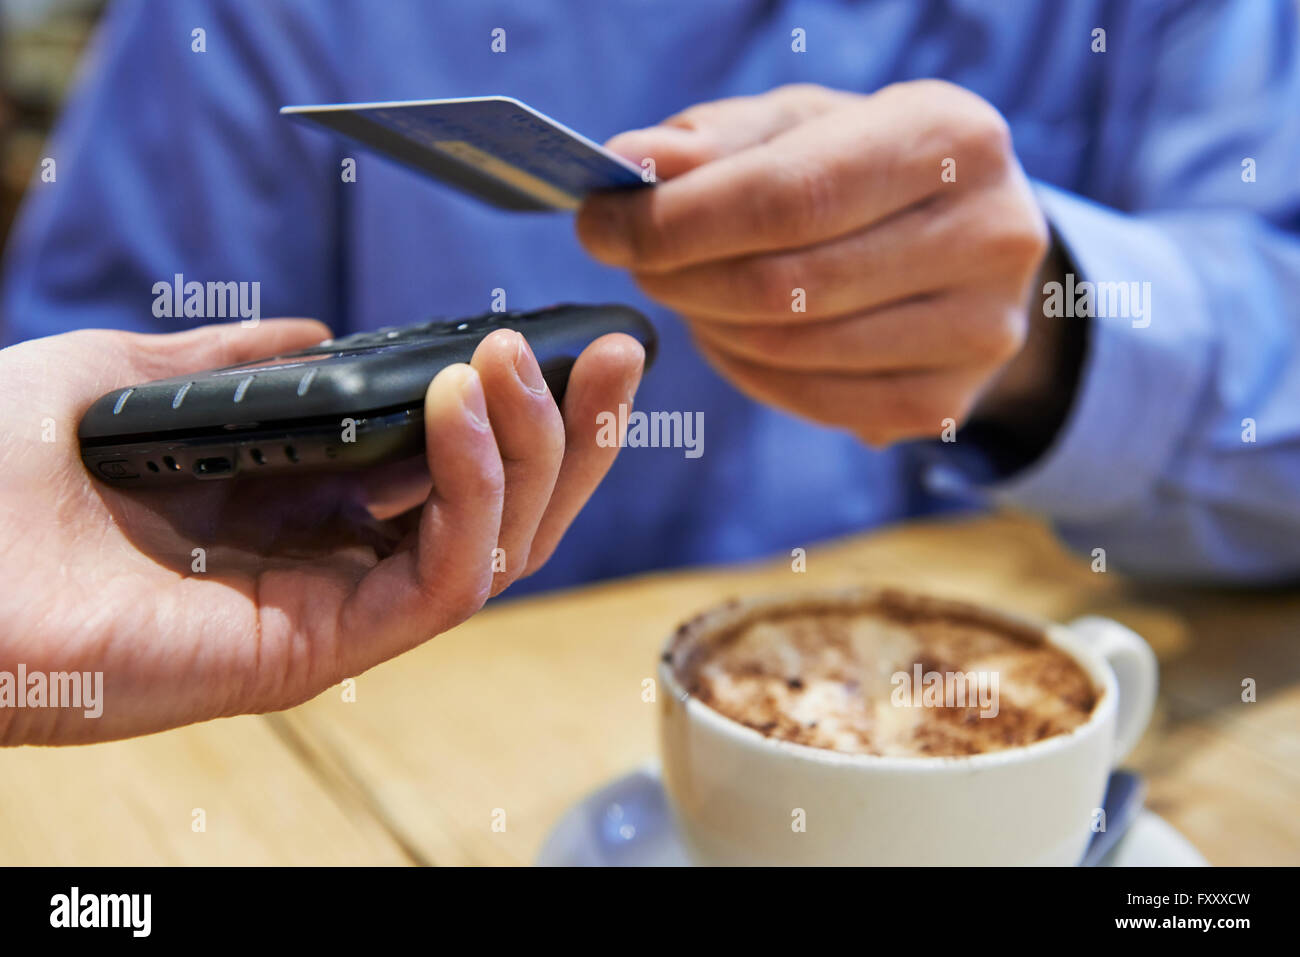 Customer Using Contactless Payment In Coffee Shop Stock Photo